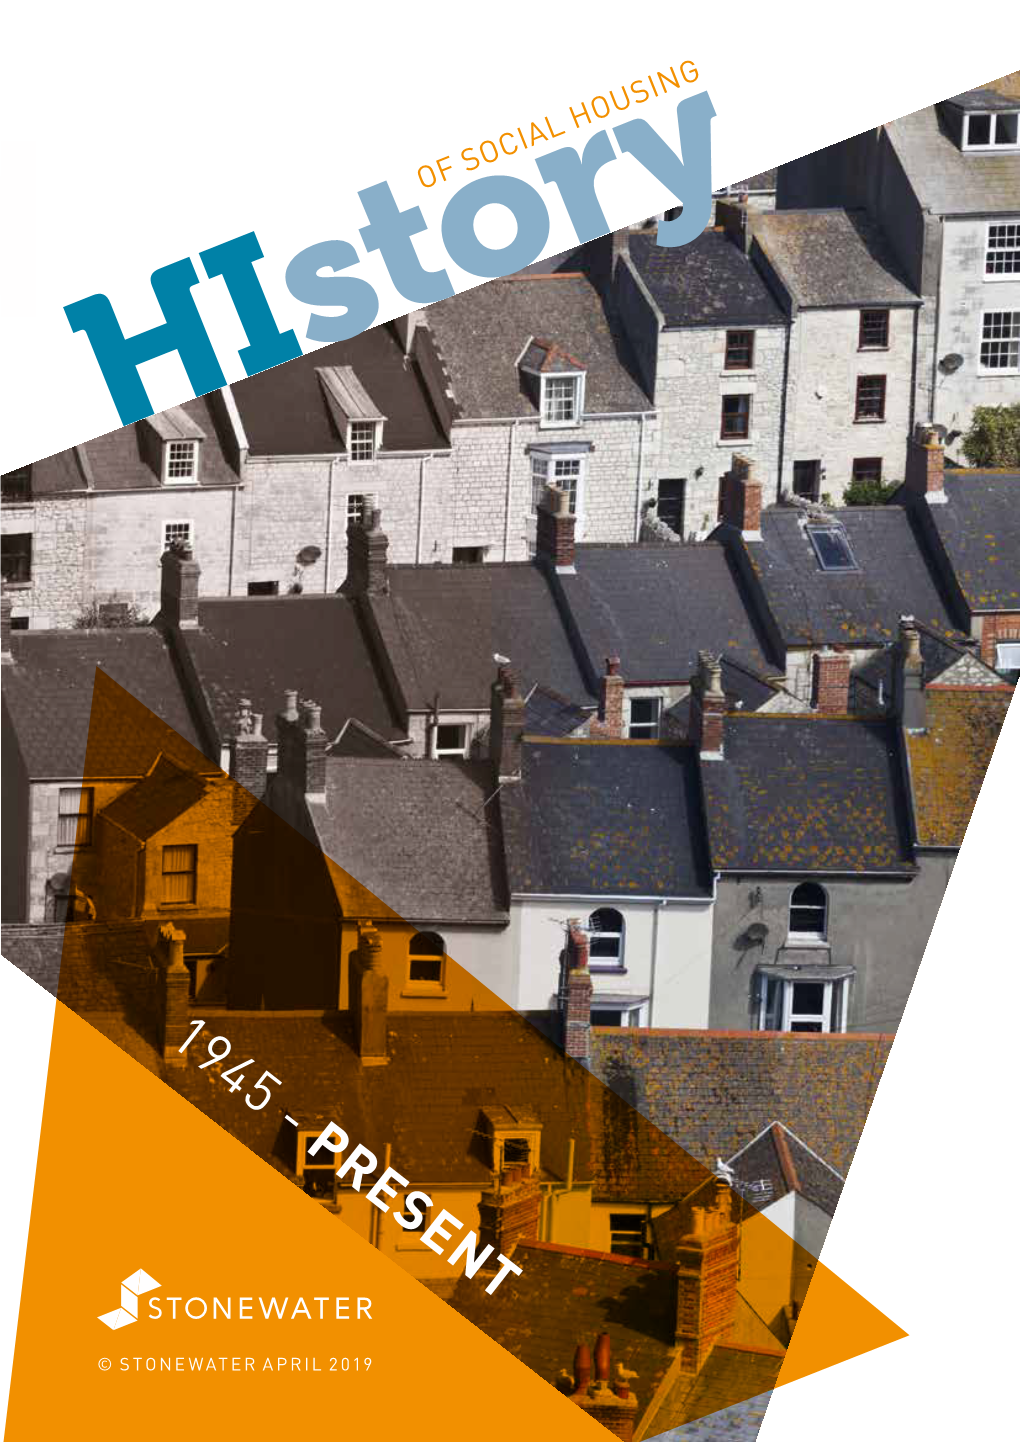 Our History of Social Housing Brochure